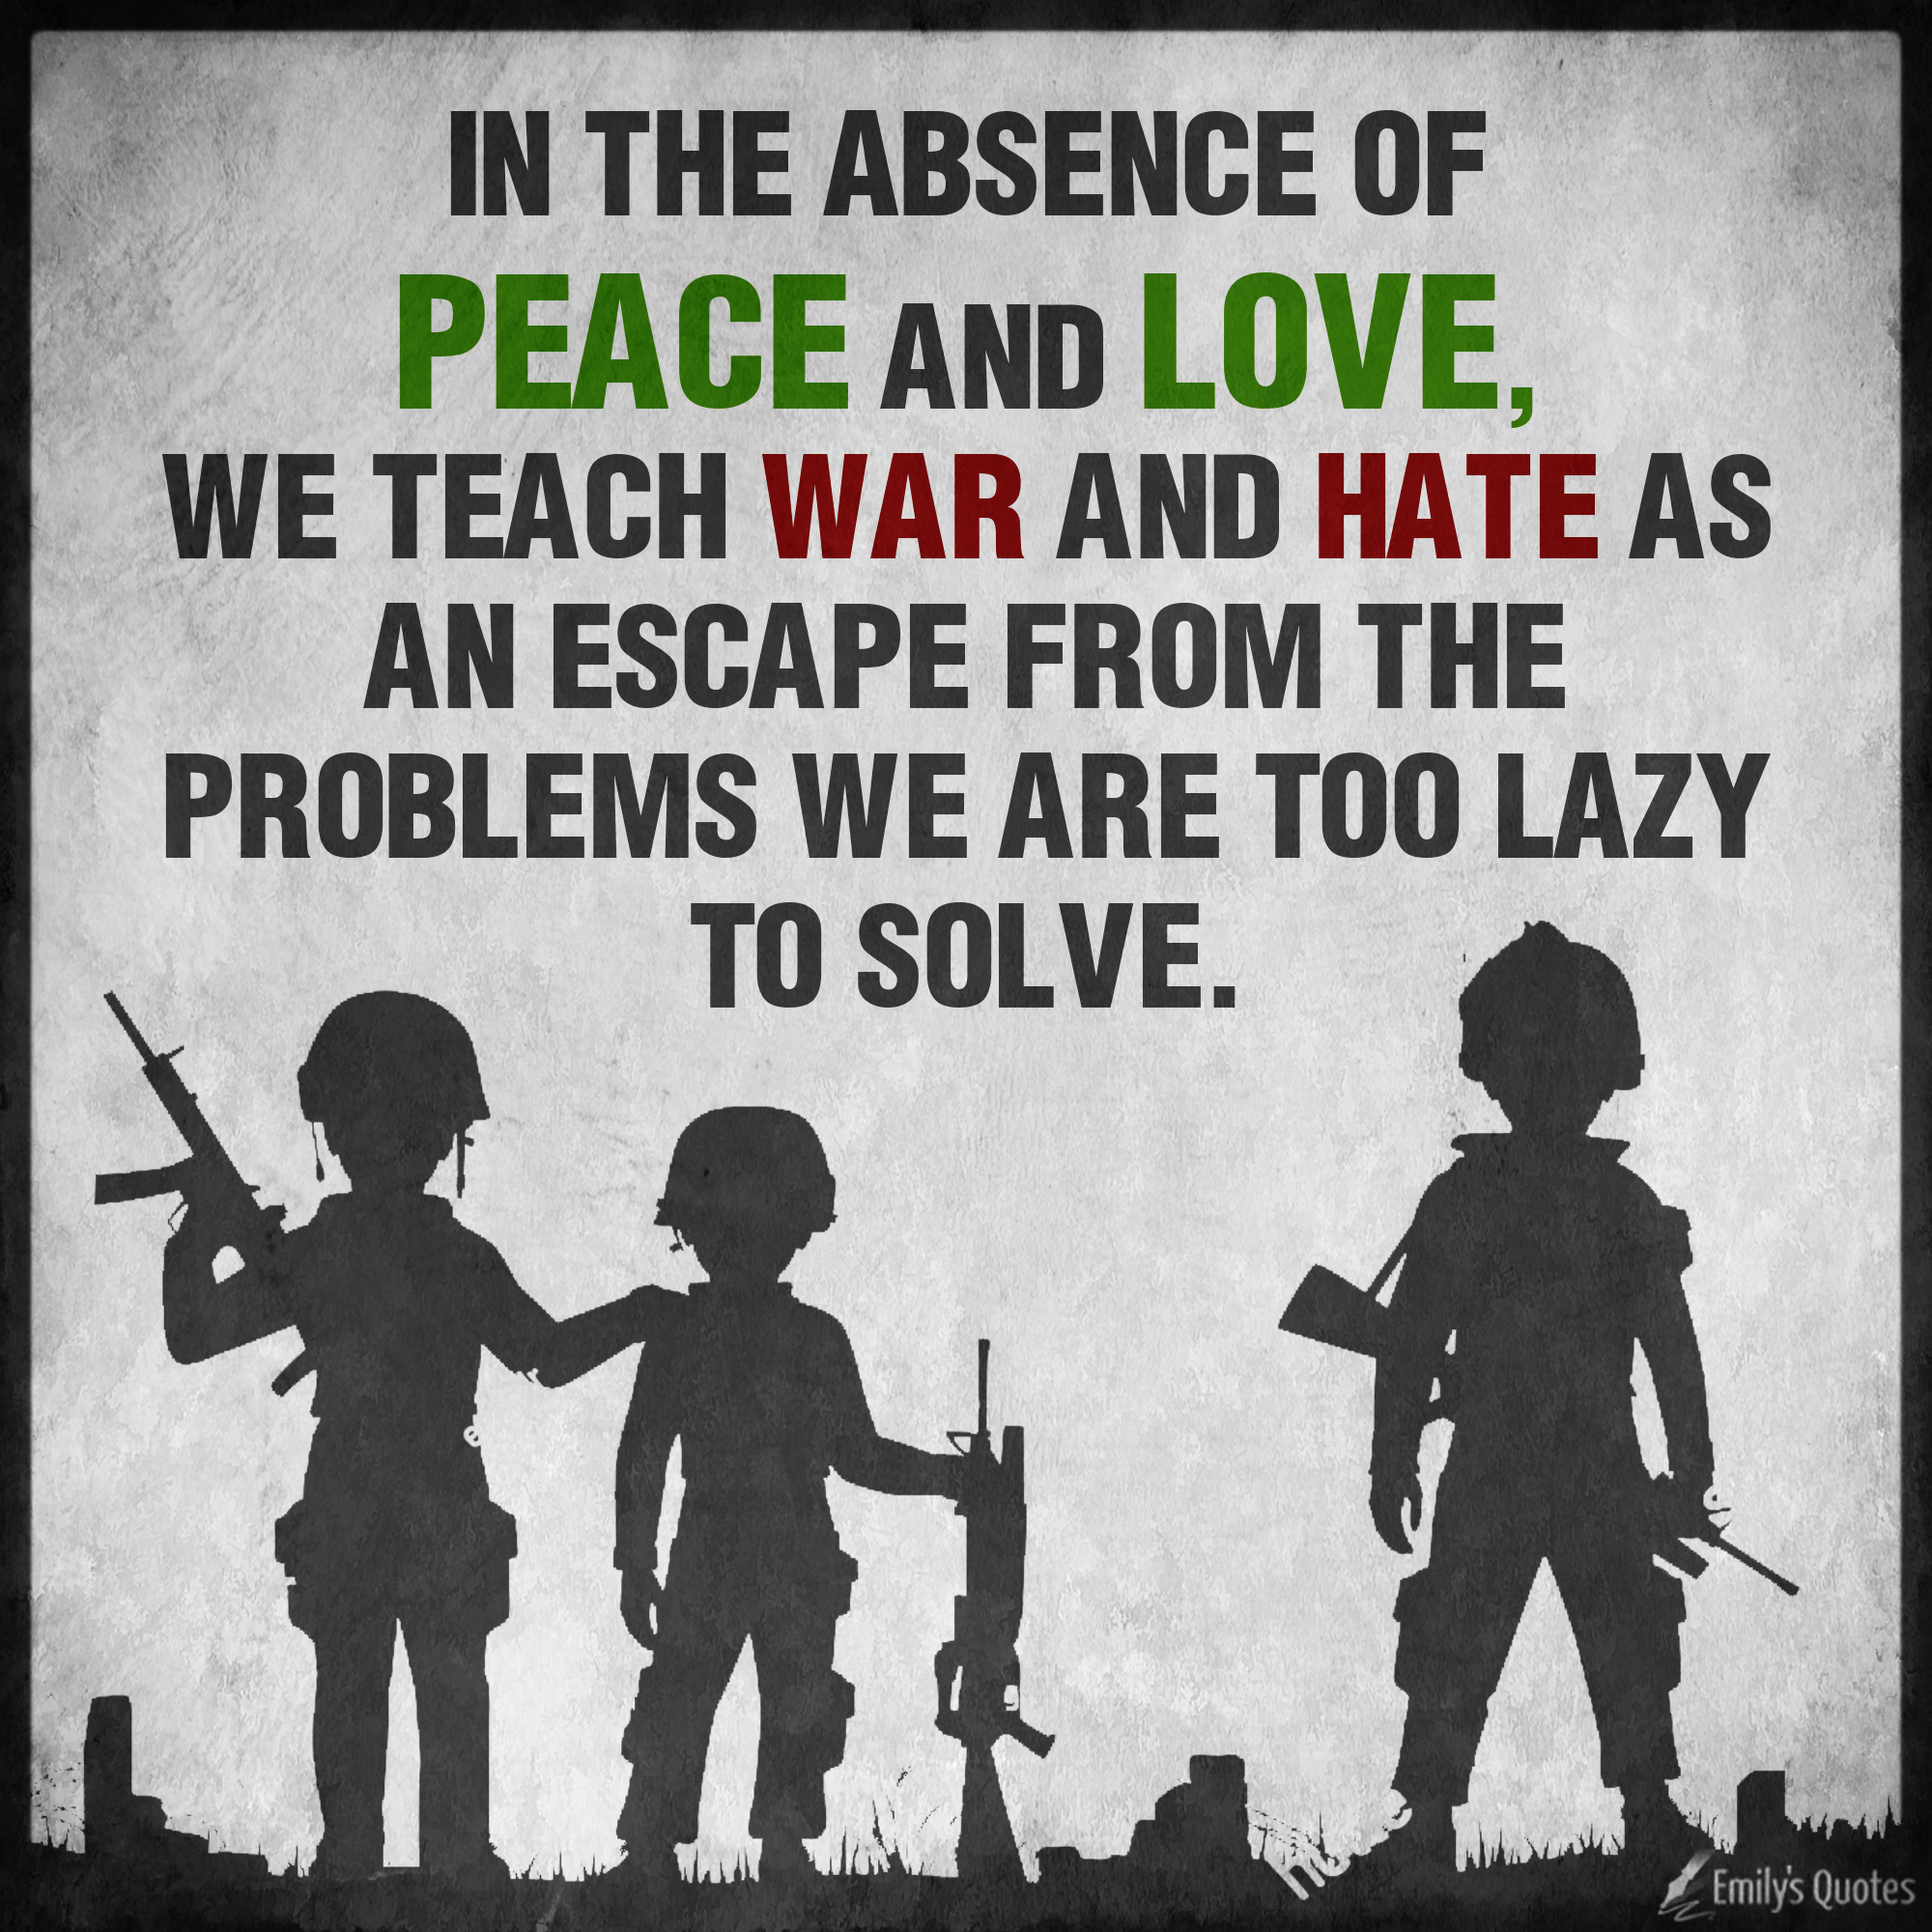 In the absence of peace and love, we teach war and hate as an escape from